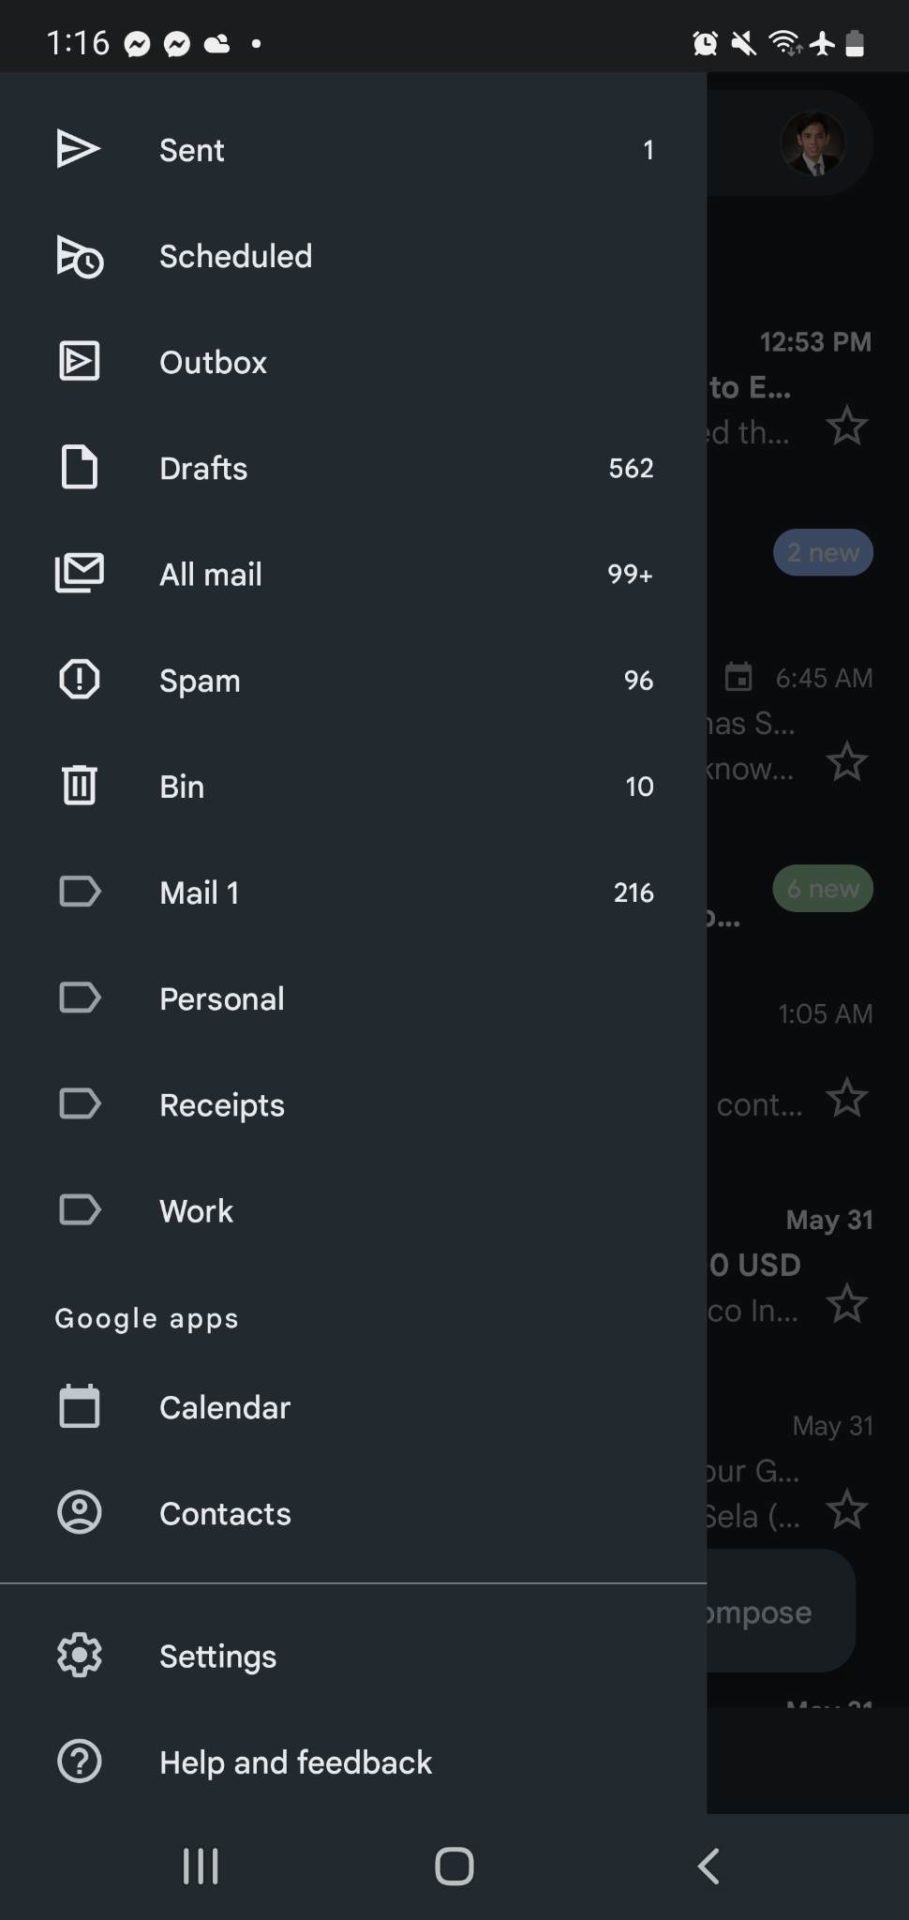 Gmail app on android - showing the settings button